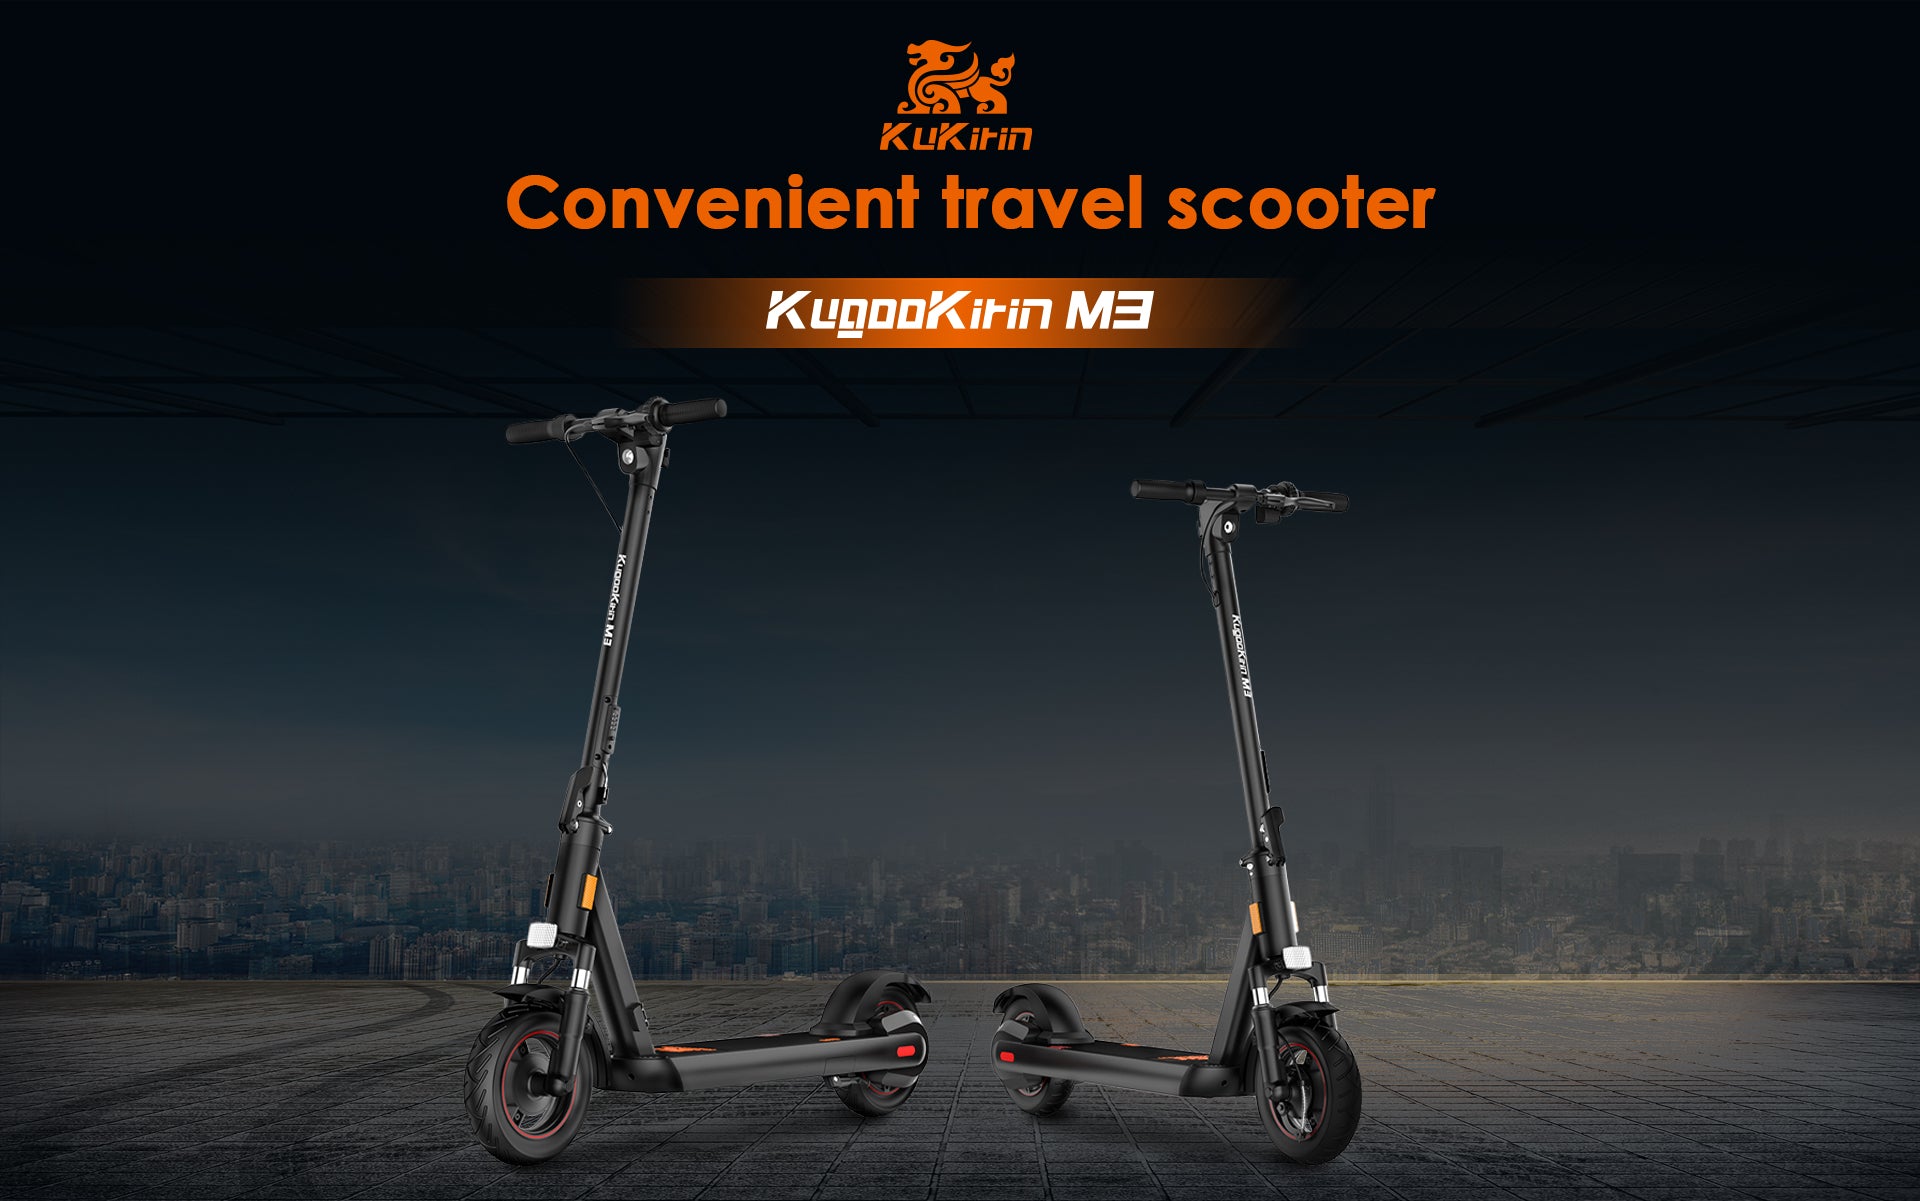 Which electric scooter has the highest speed?